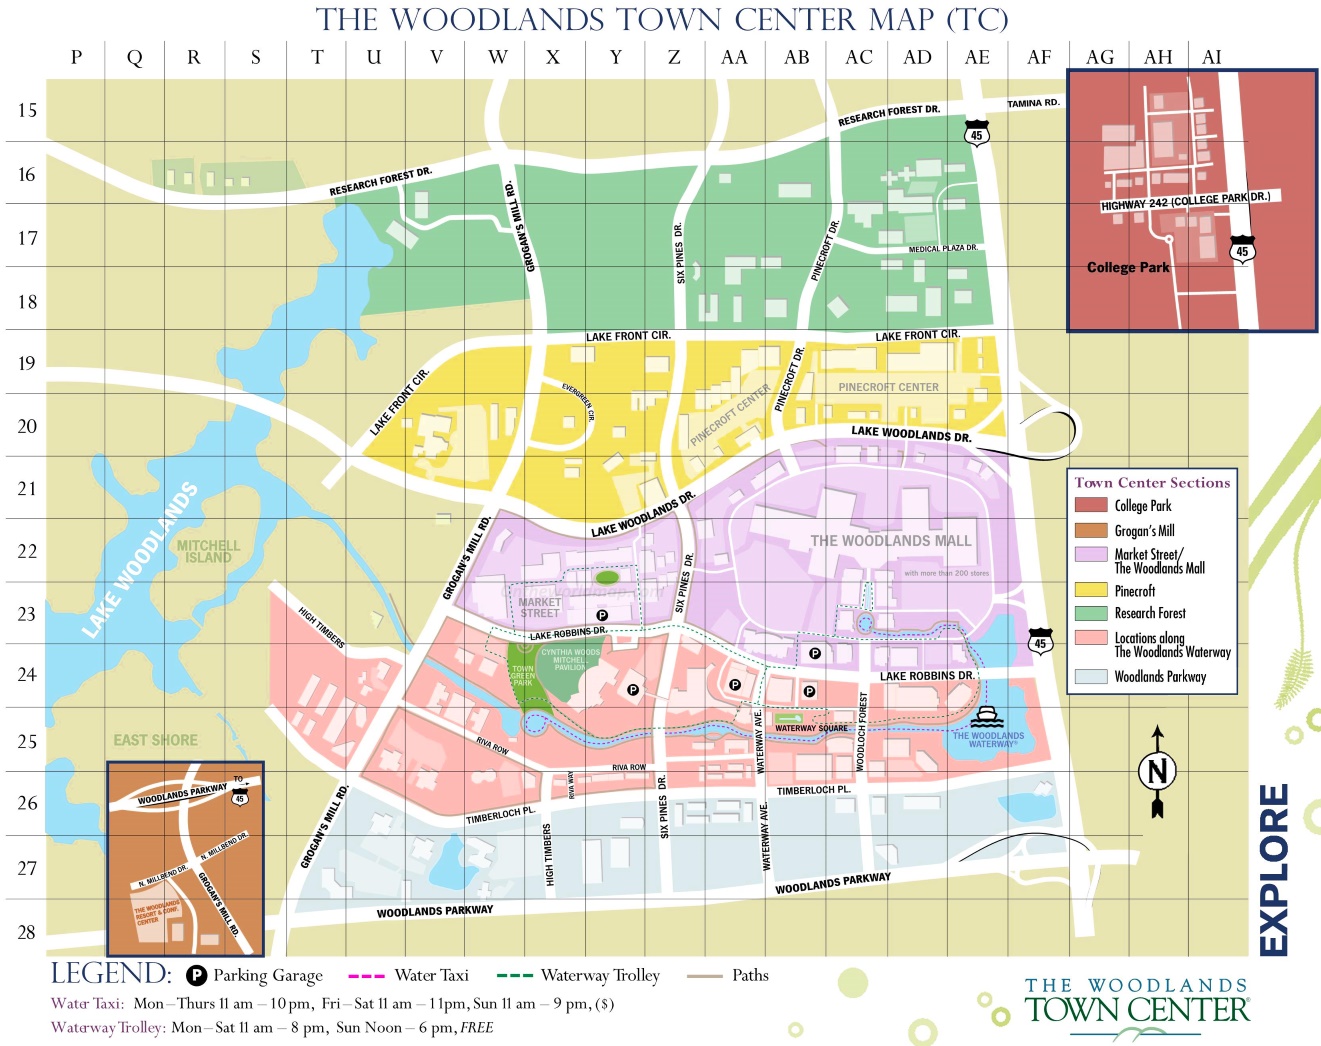 The Woodlands Town Center Map